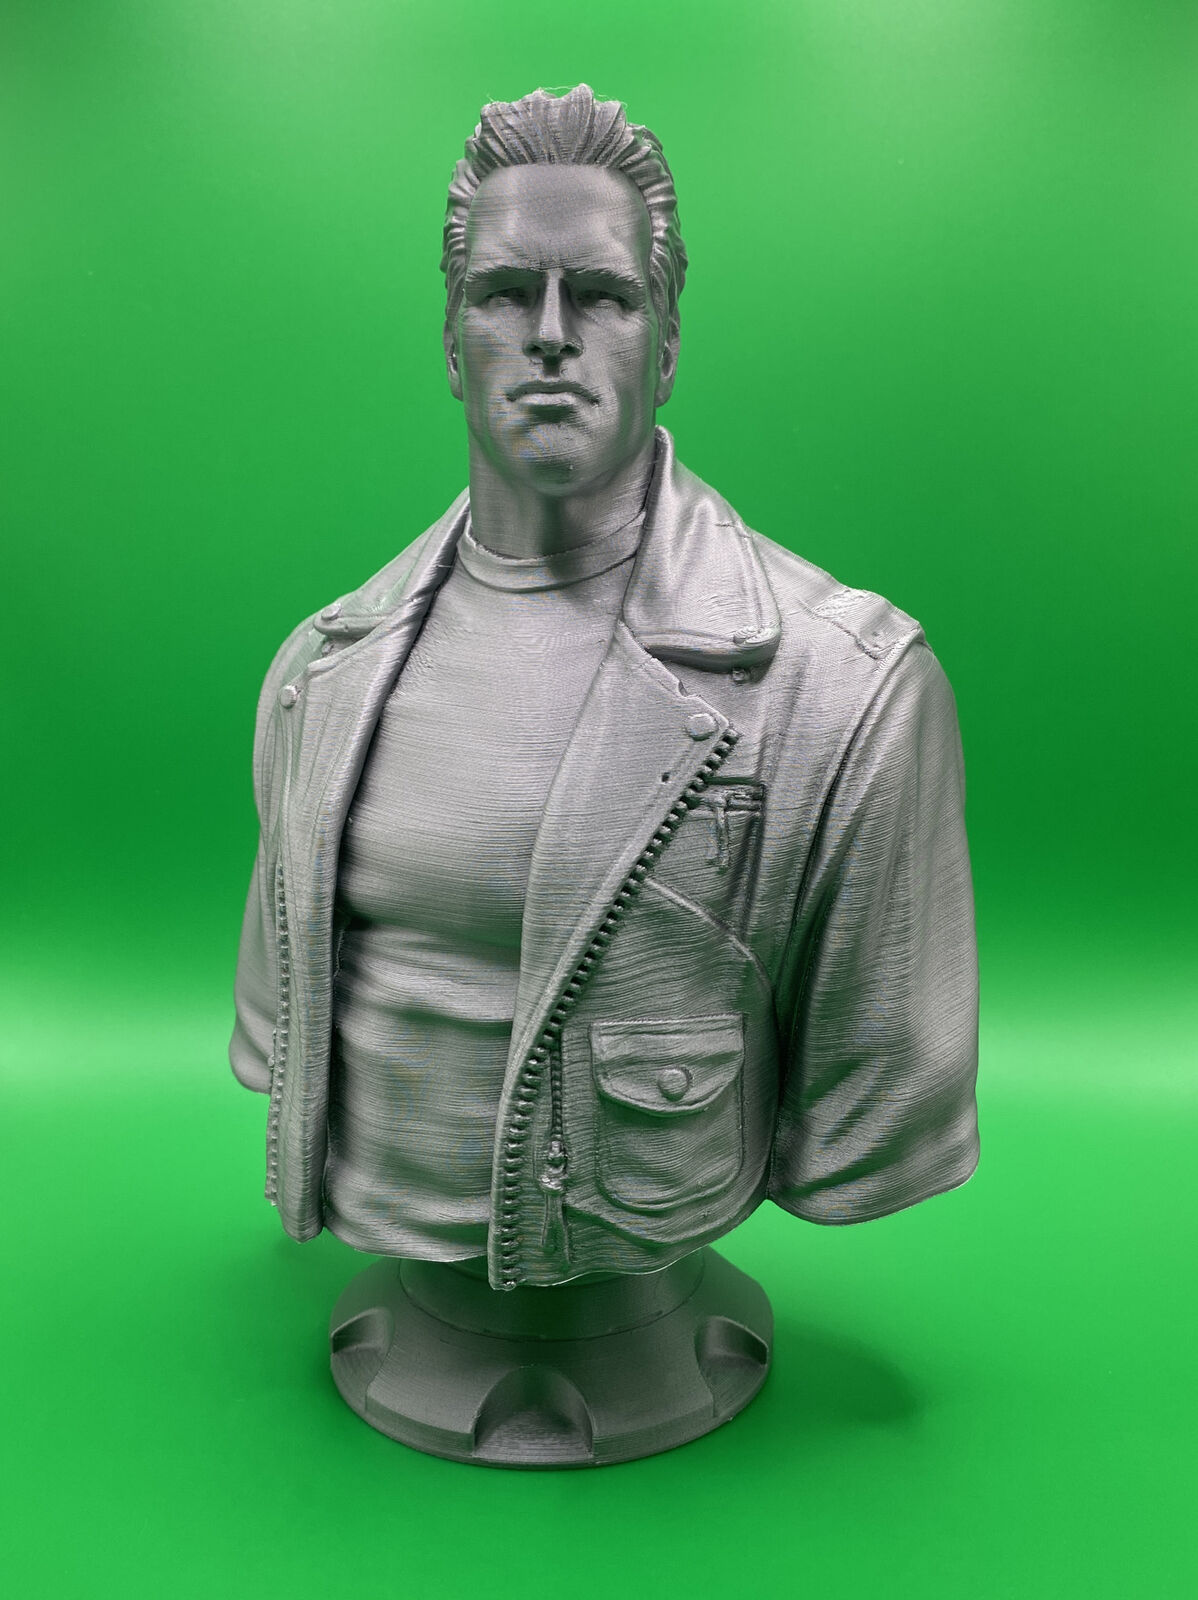 Terminator Statue 3D Printed | Paintable Plastic Filament | 7 Inches Tall